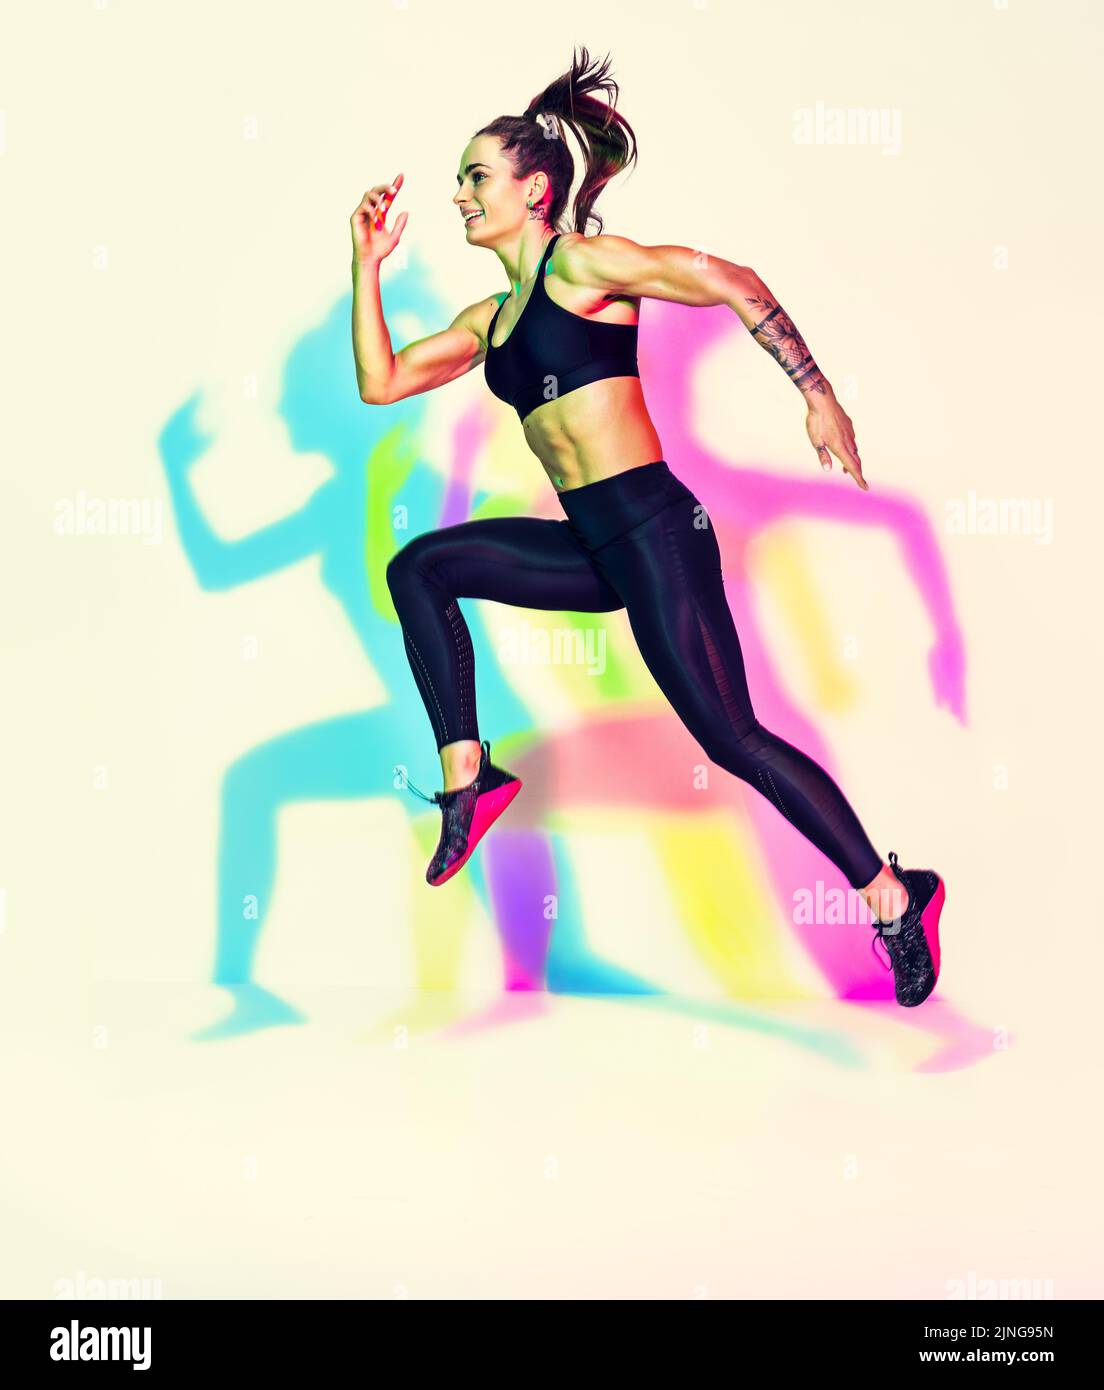 Sporty woman runner in silhouette. Photo of muscular woman in black sportswear on white background with effect of rgb colors shadows. Dynamic movement Stock Photo